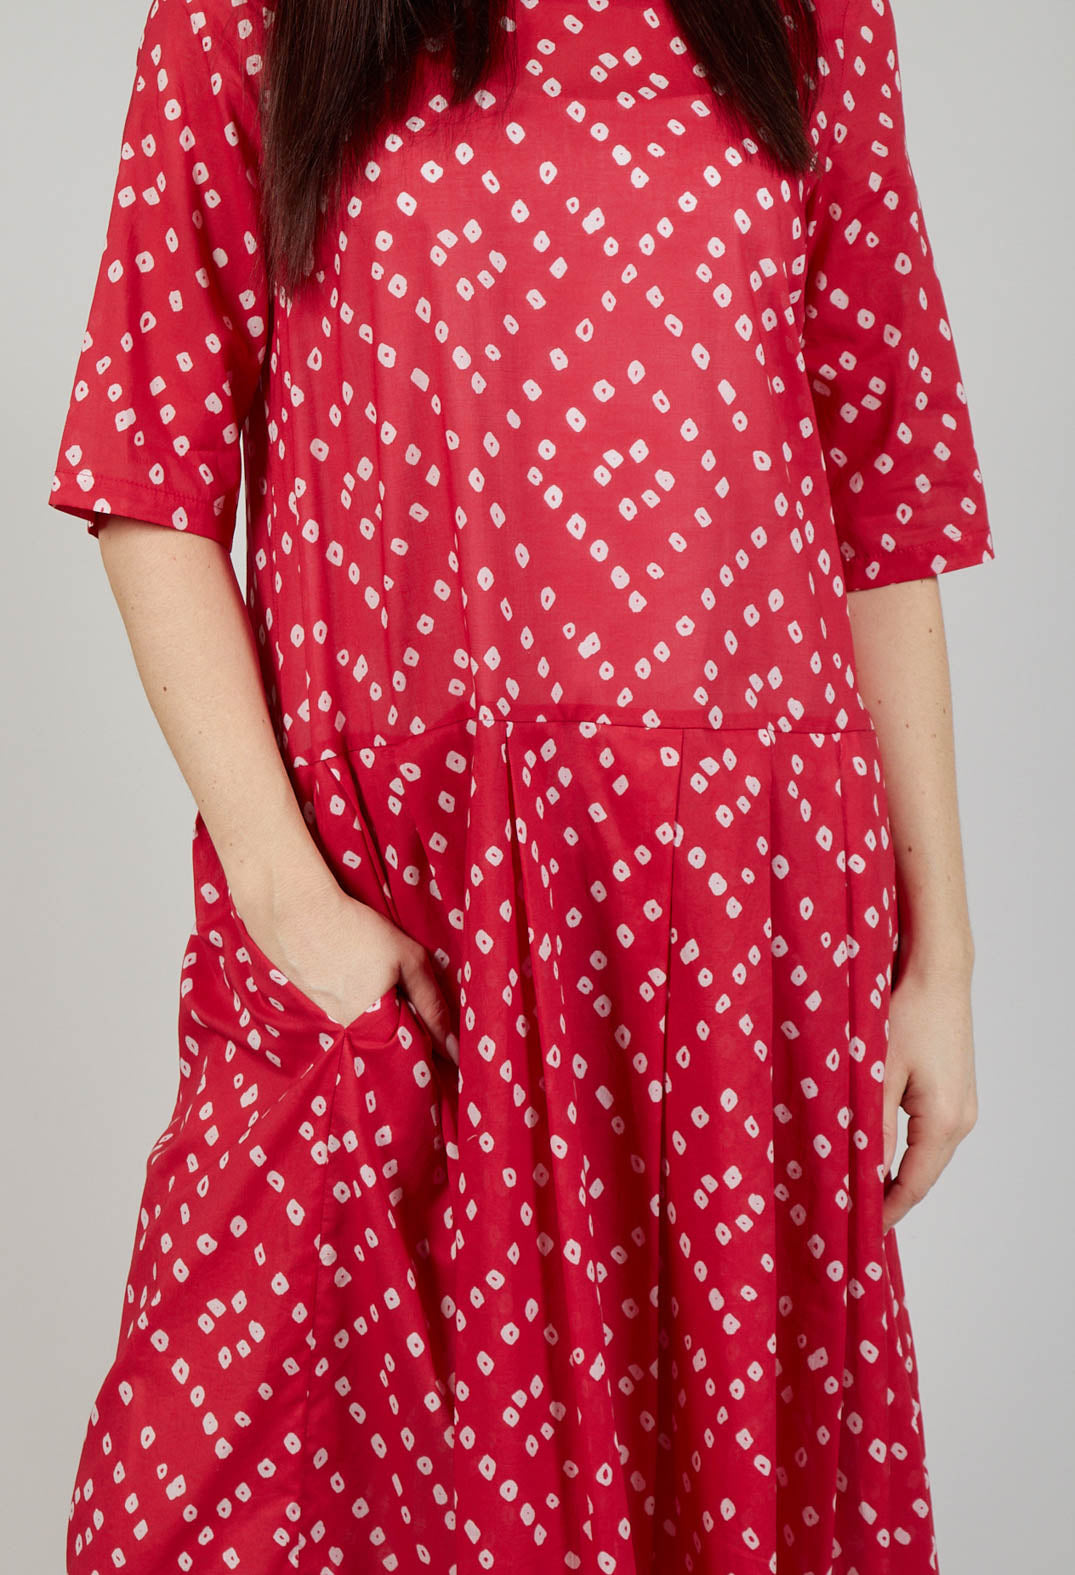 Rombo Patterned Dress in Rosso